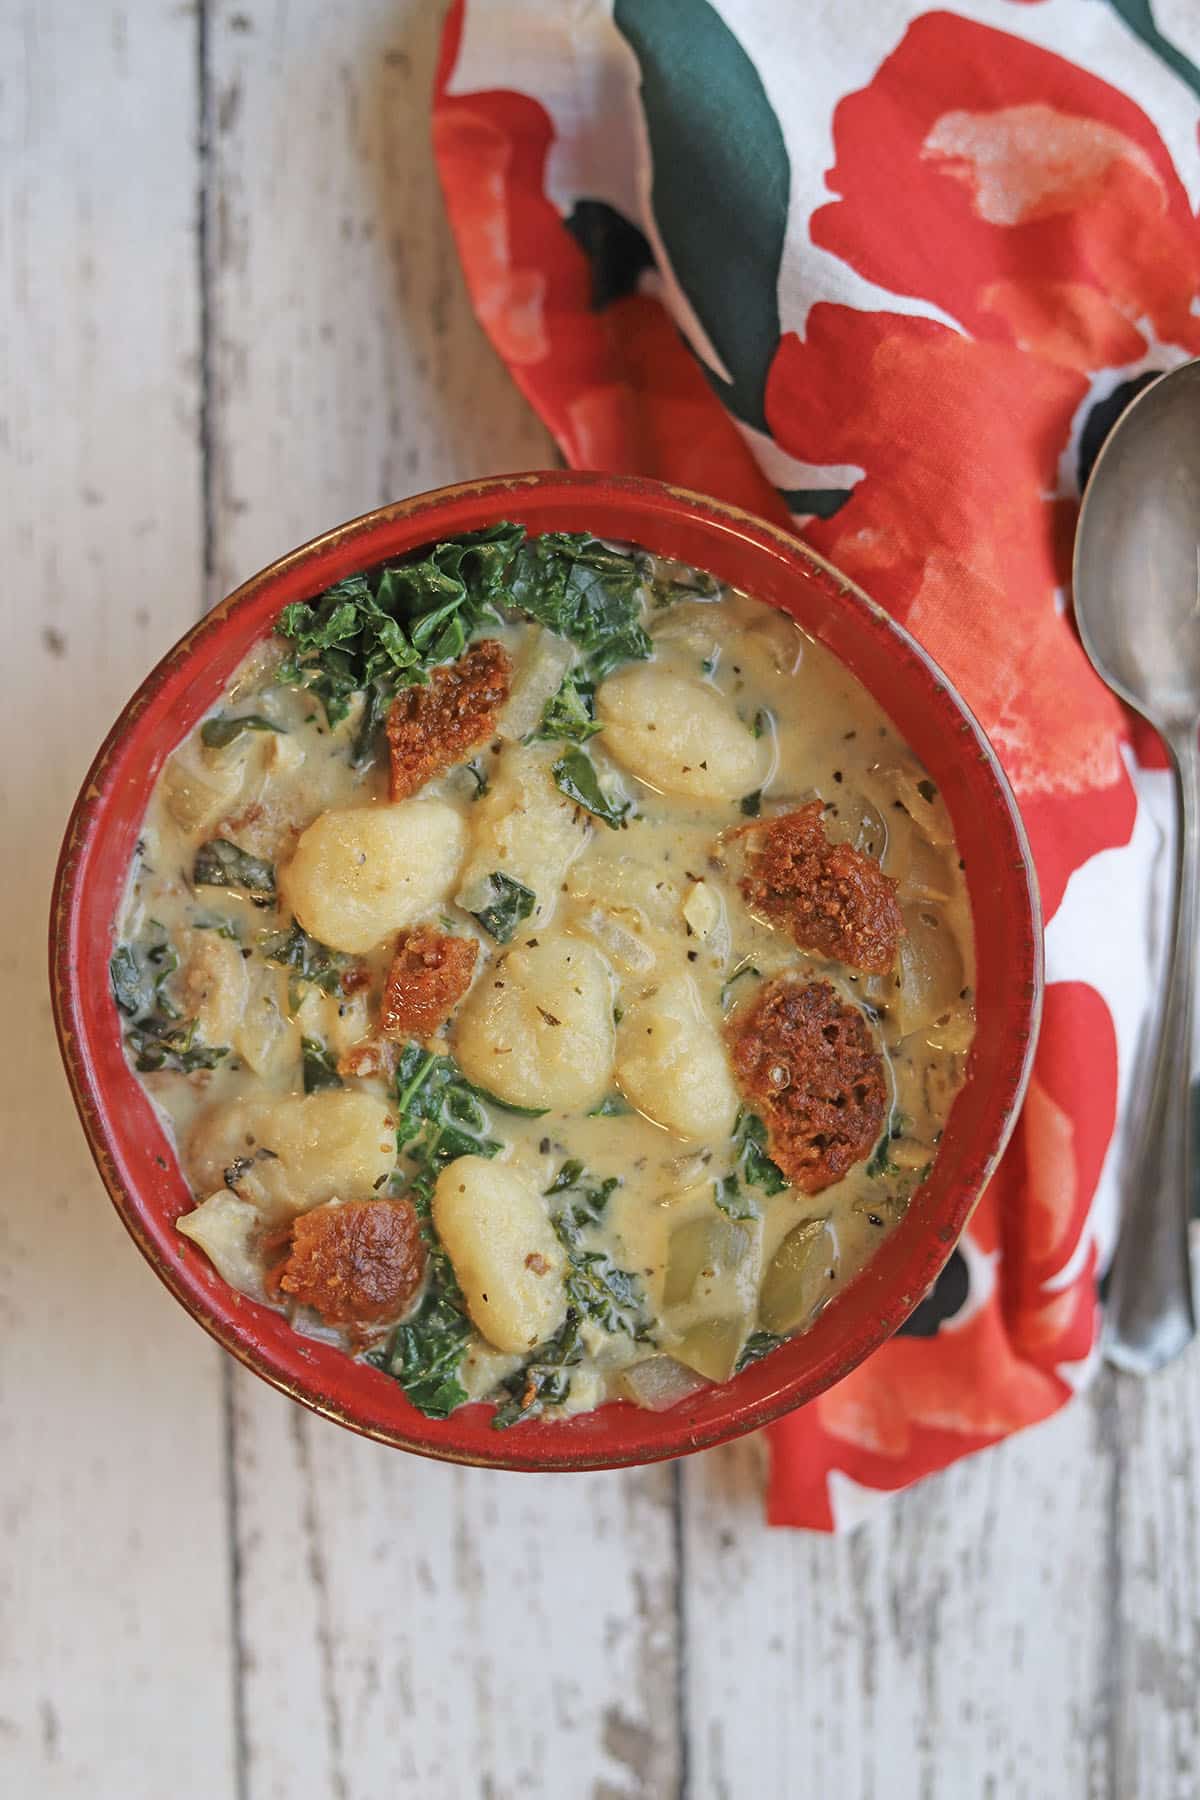 Bowl of vegan soup with gnocchi, sausage and kale by floral napkin.